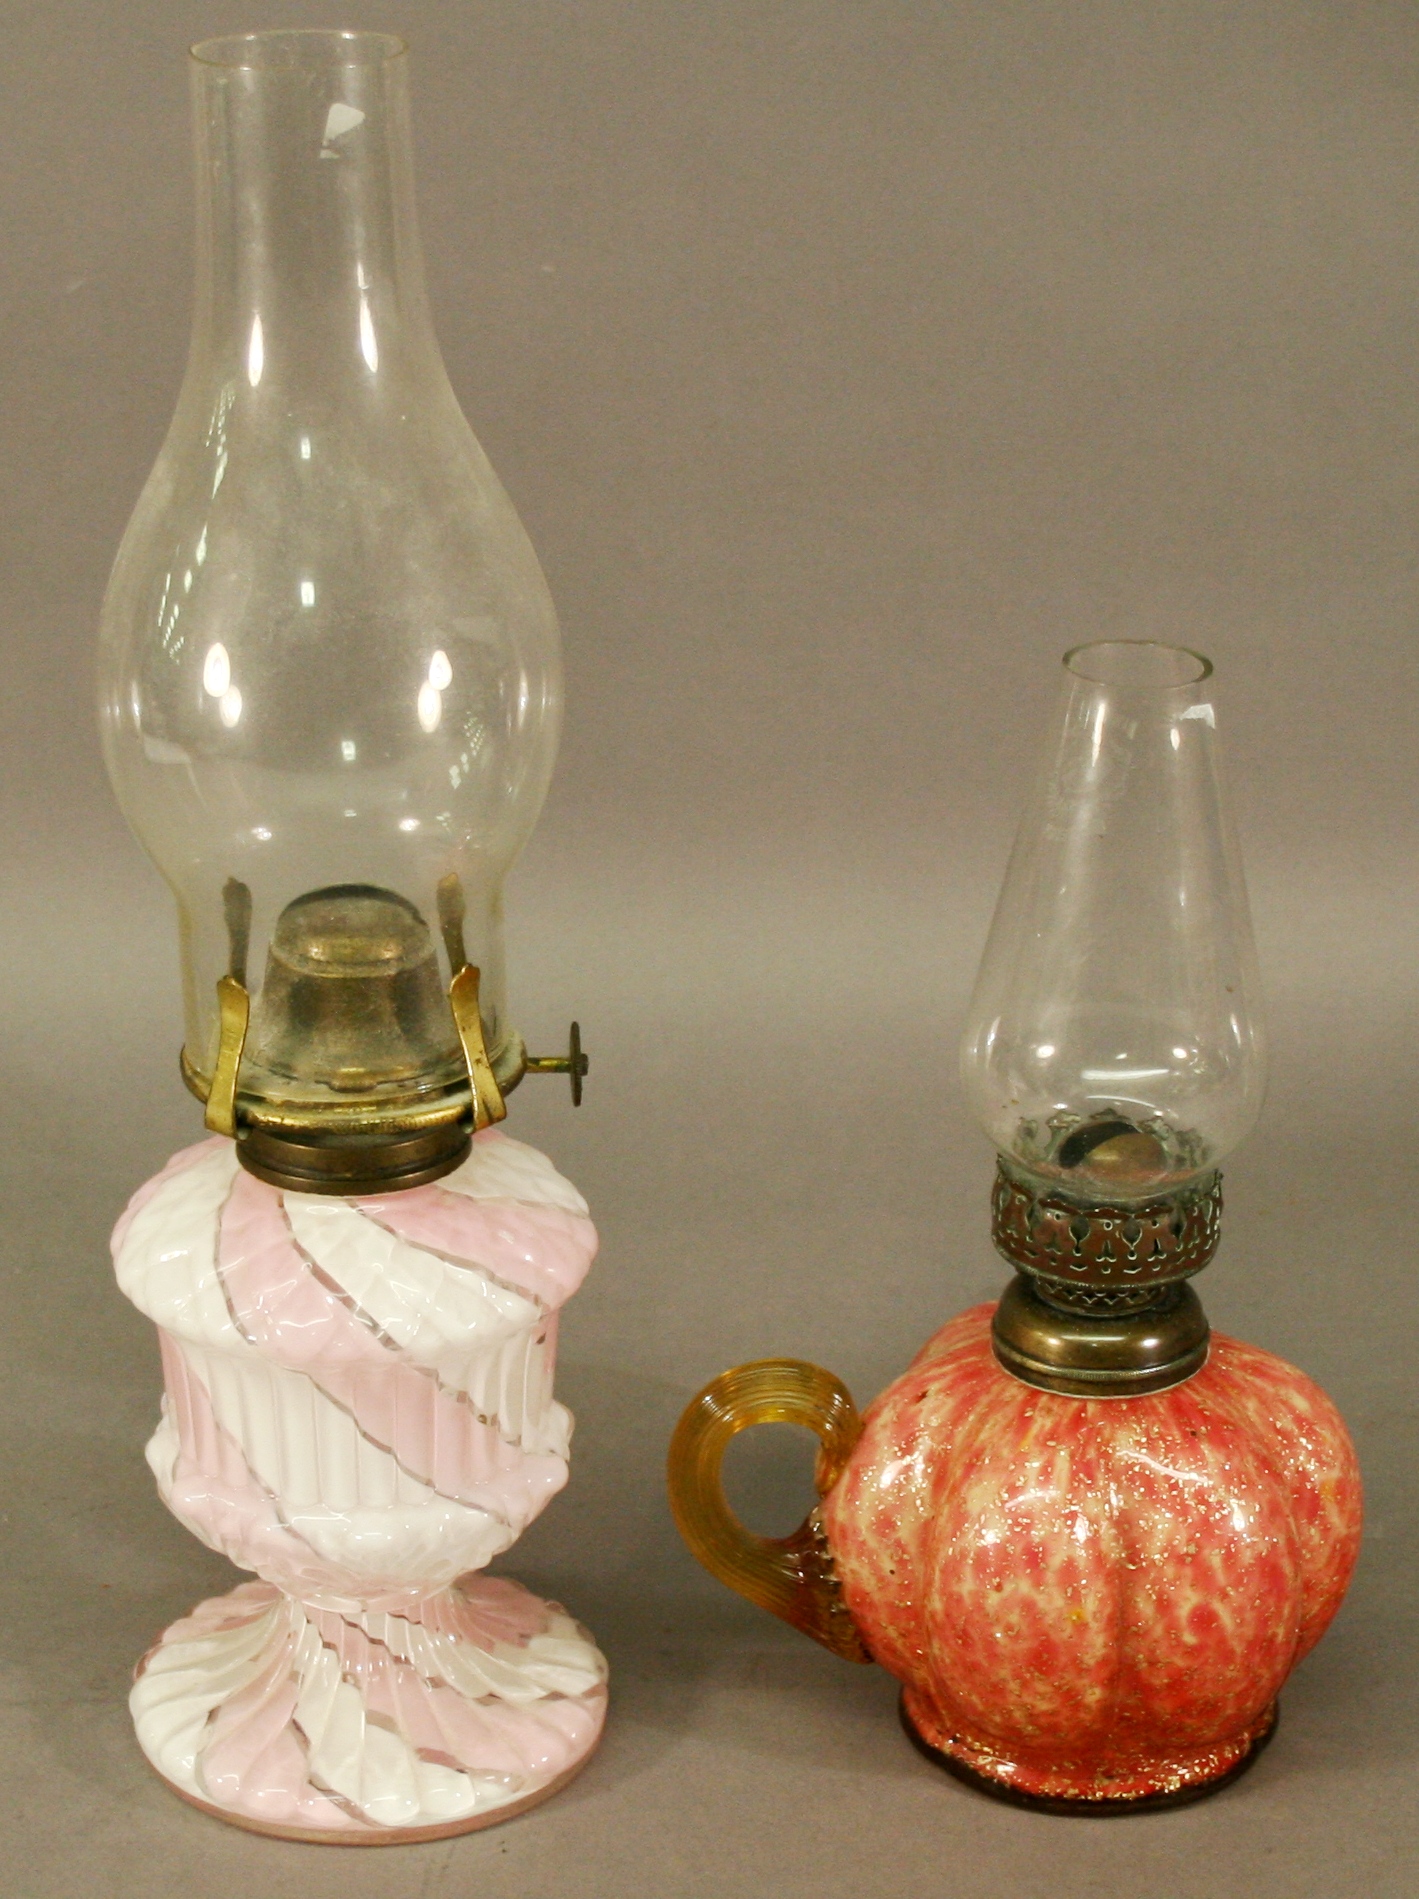 A VICTORIAN GLASS HAND-HELD OIL LAMP of lobed pumpkin form with mottled pink colouring and